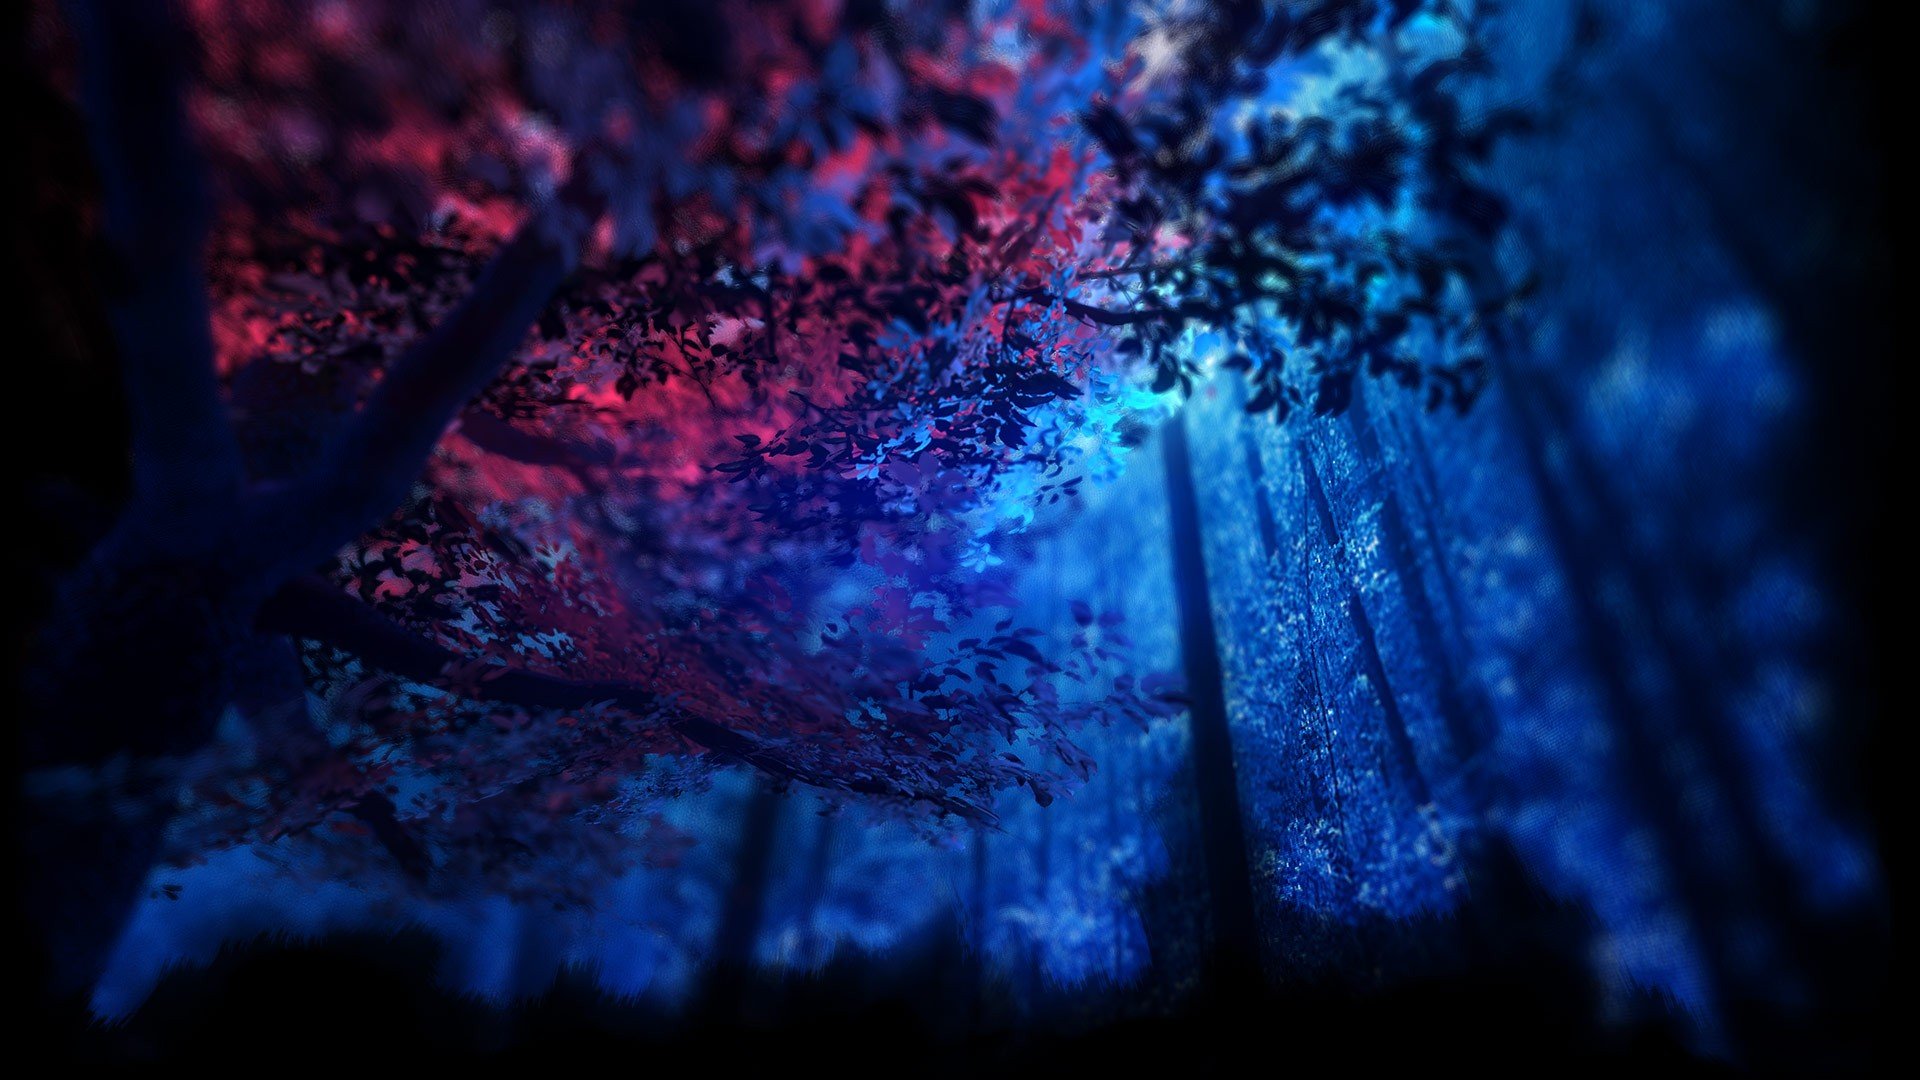 wallpaper for profile pic,blue,nature,sky,purple,darkness